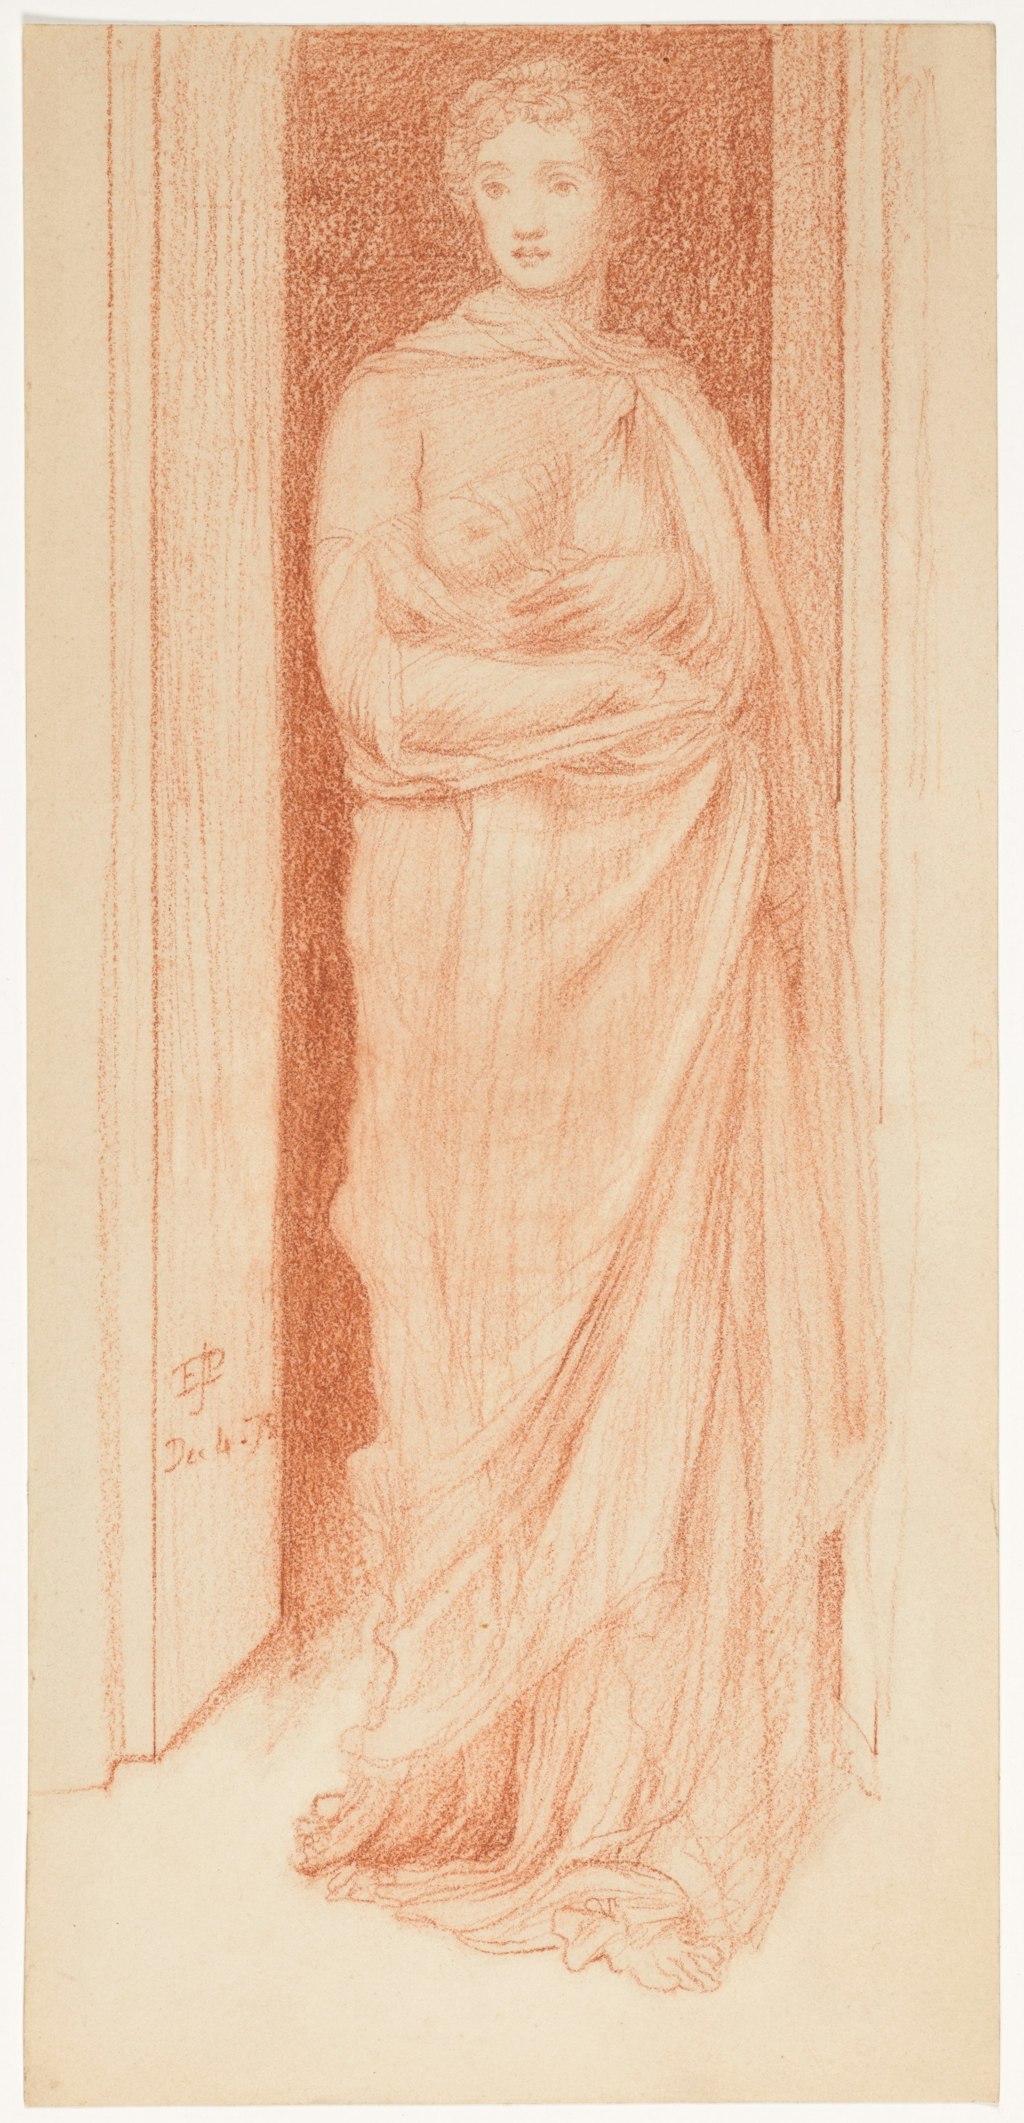 A sketch of a person draped in a long classical robe standing in a doorway